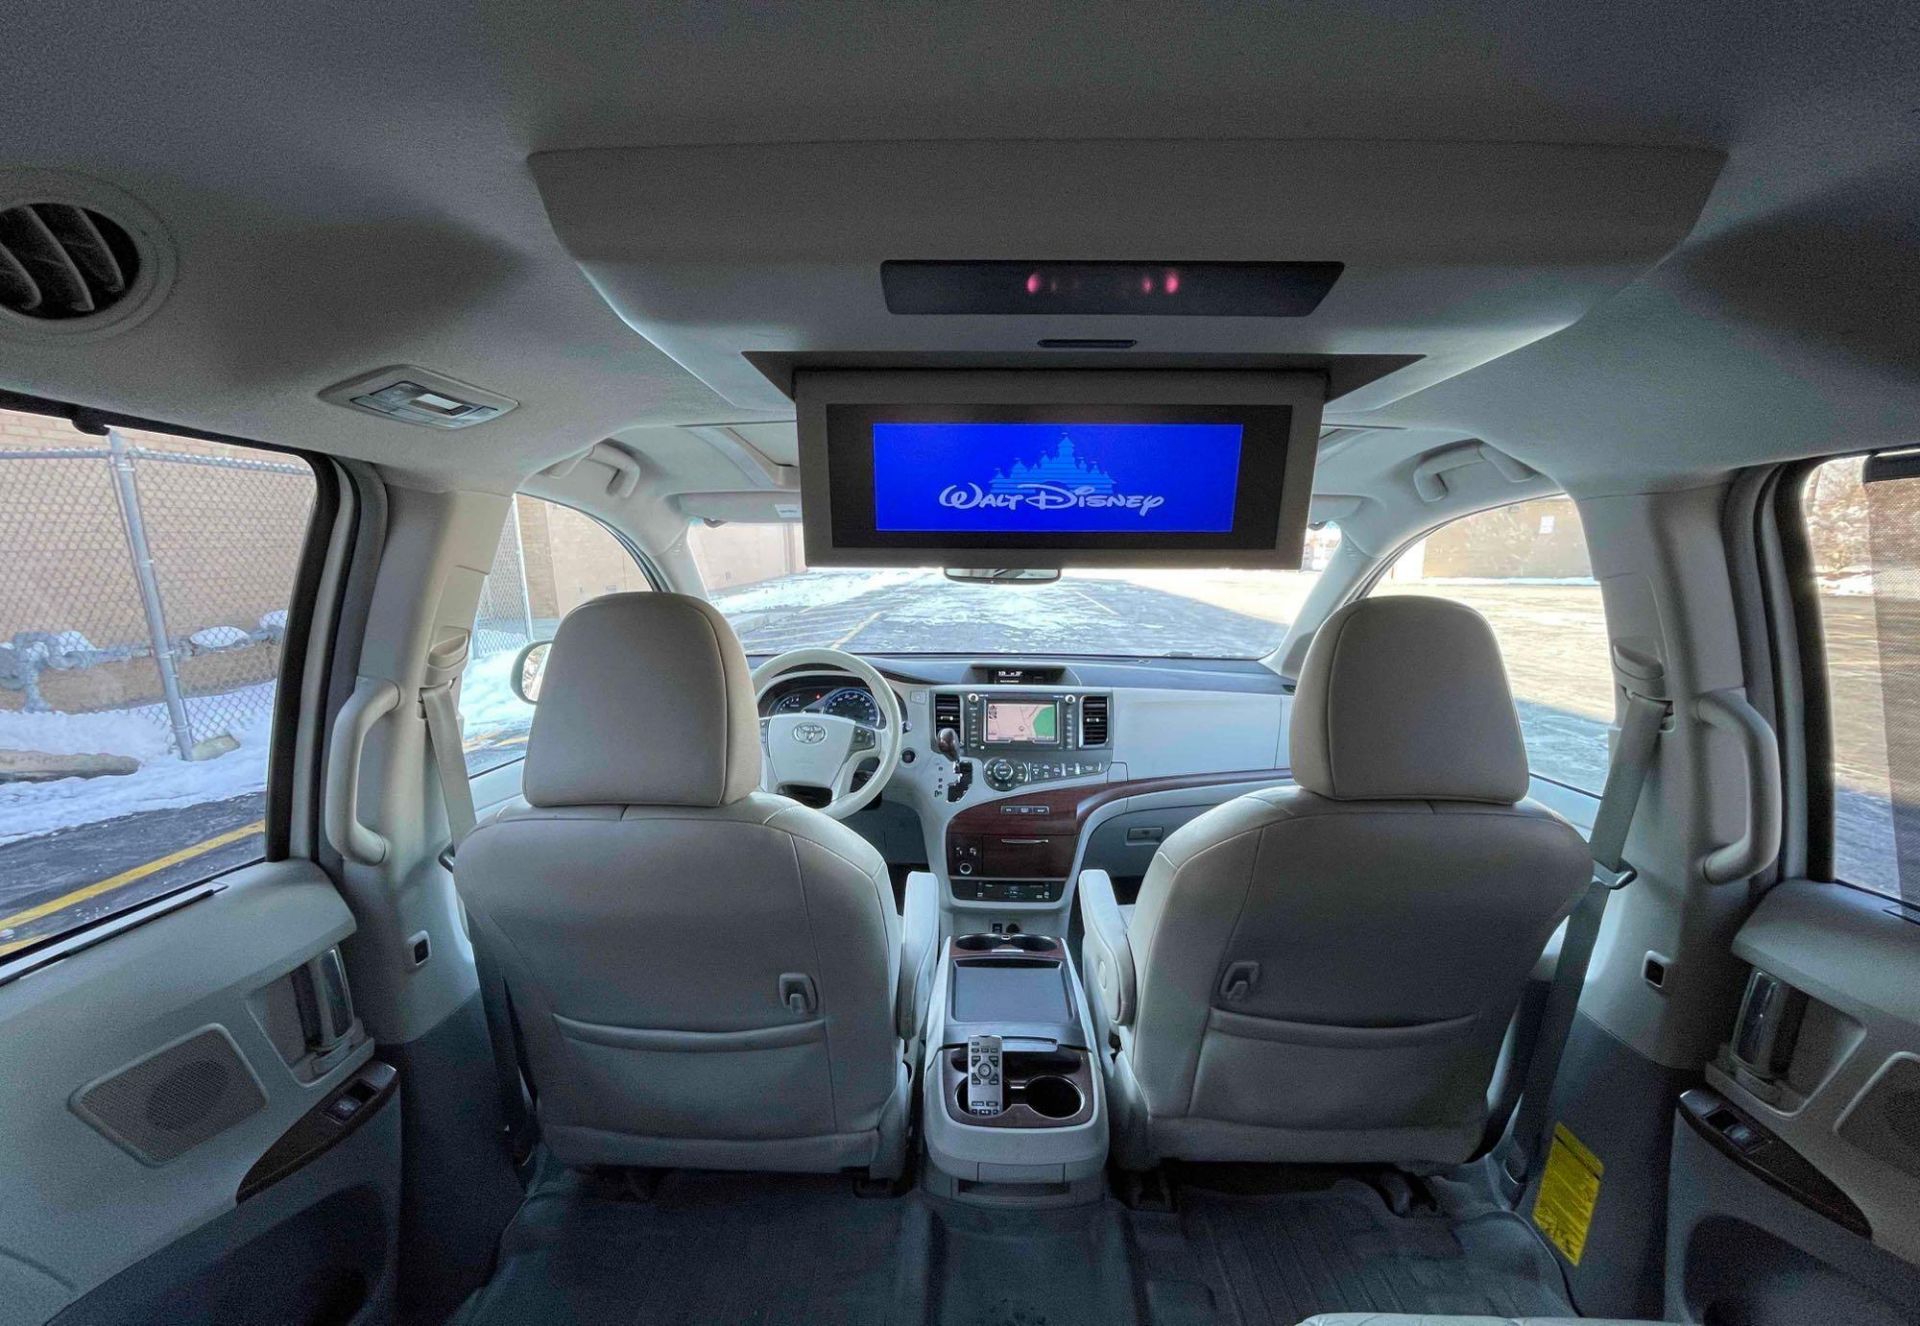 2011 Toyota Sienna XLE - Image 6 of 18